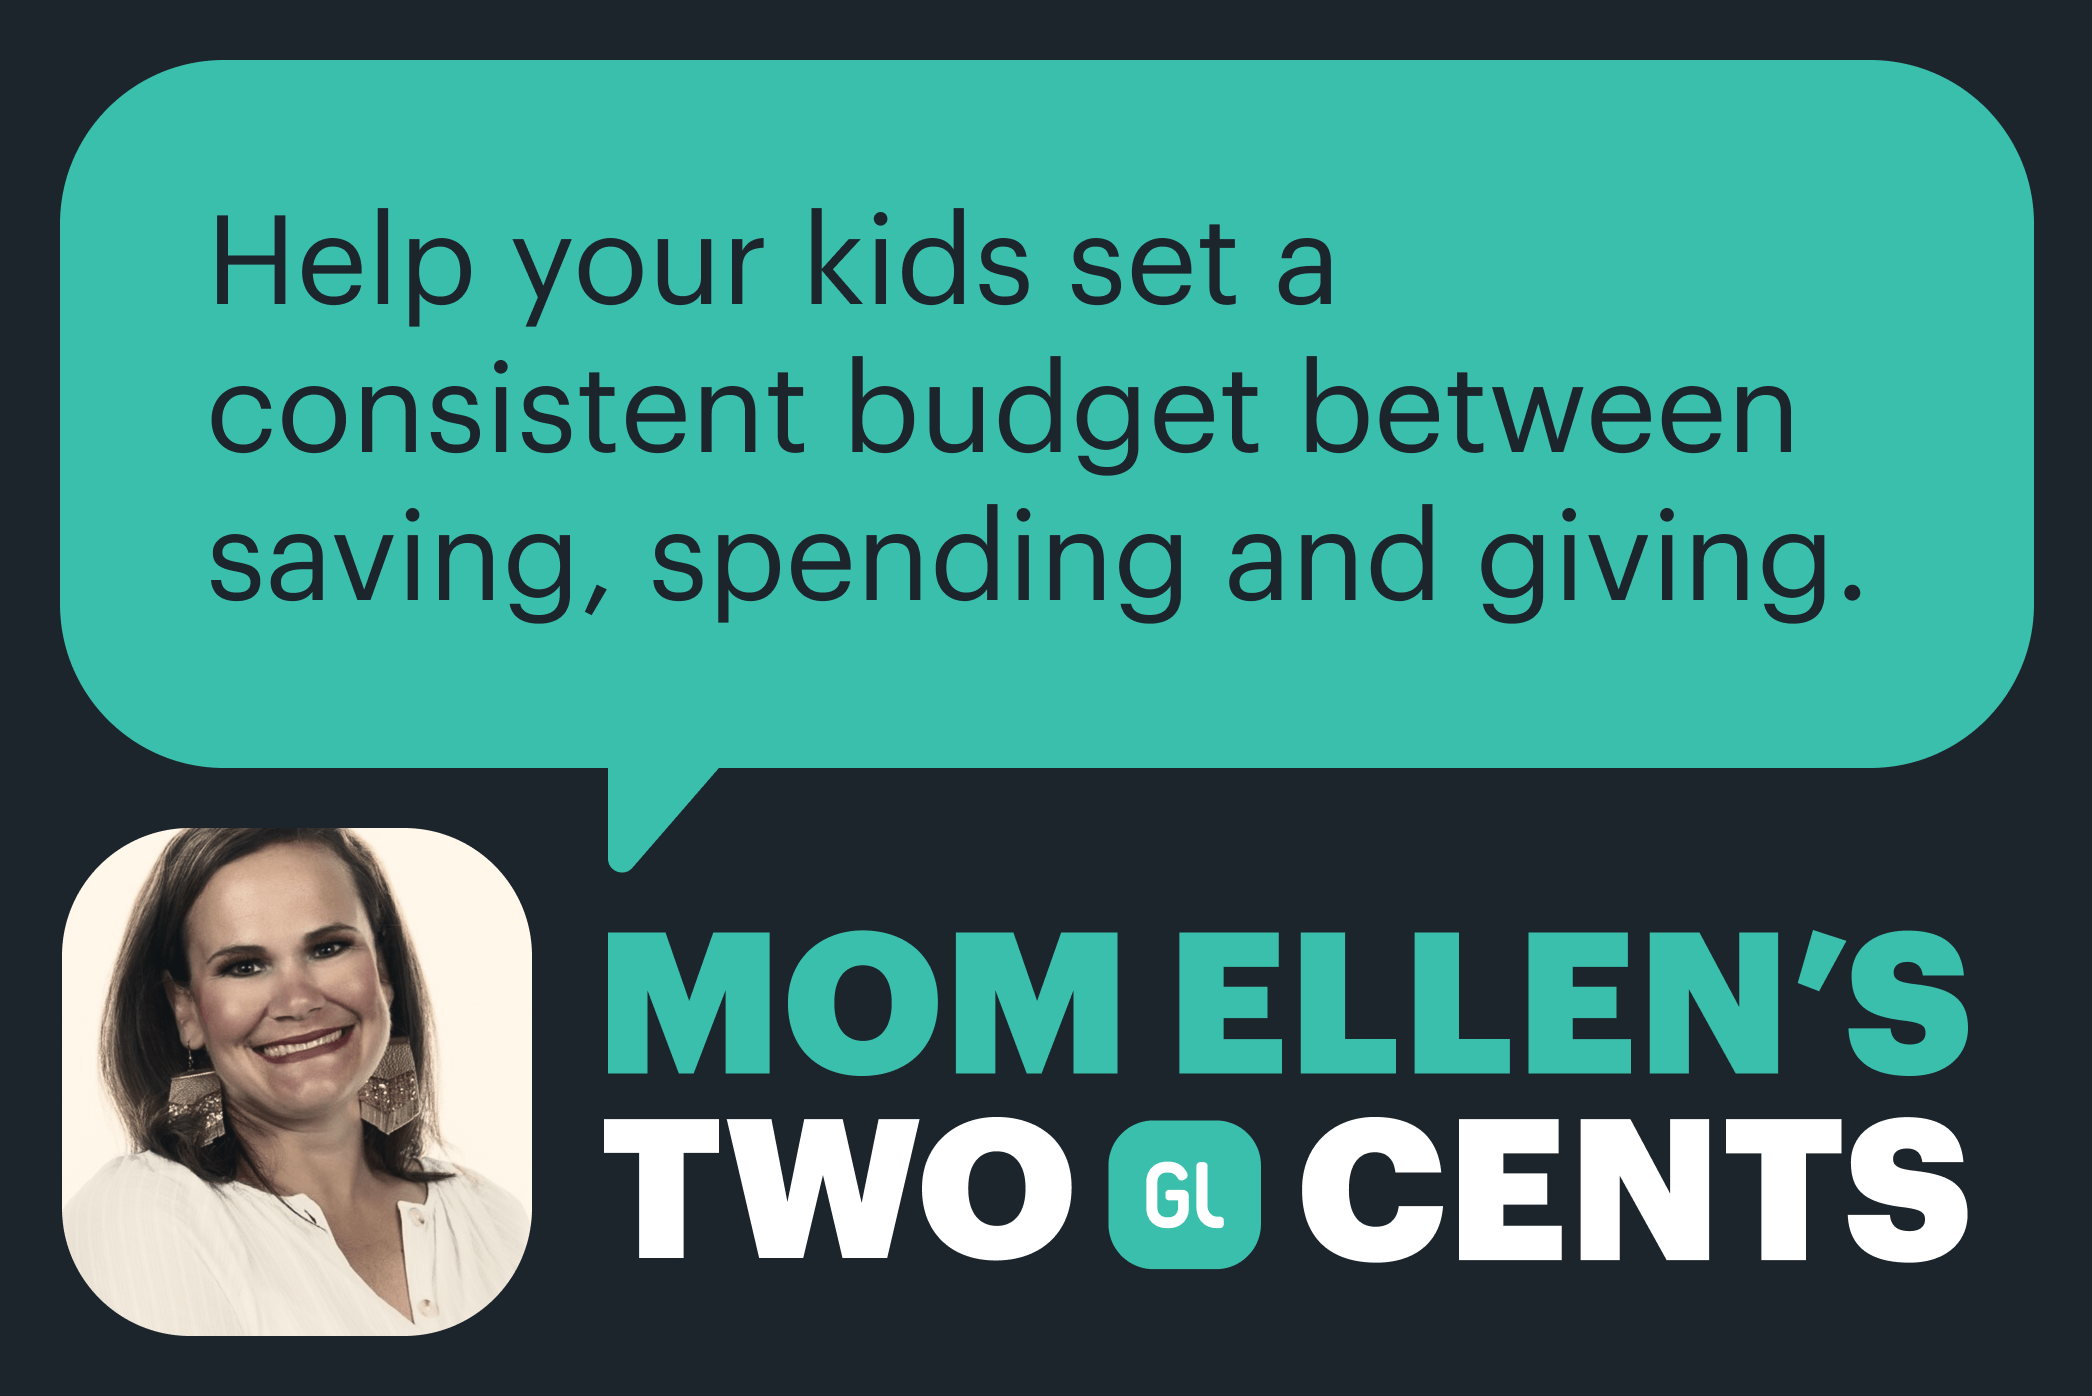 Mom Ellen's two cents quote